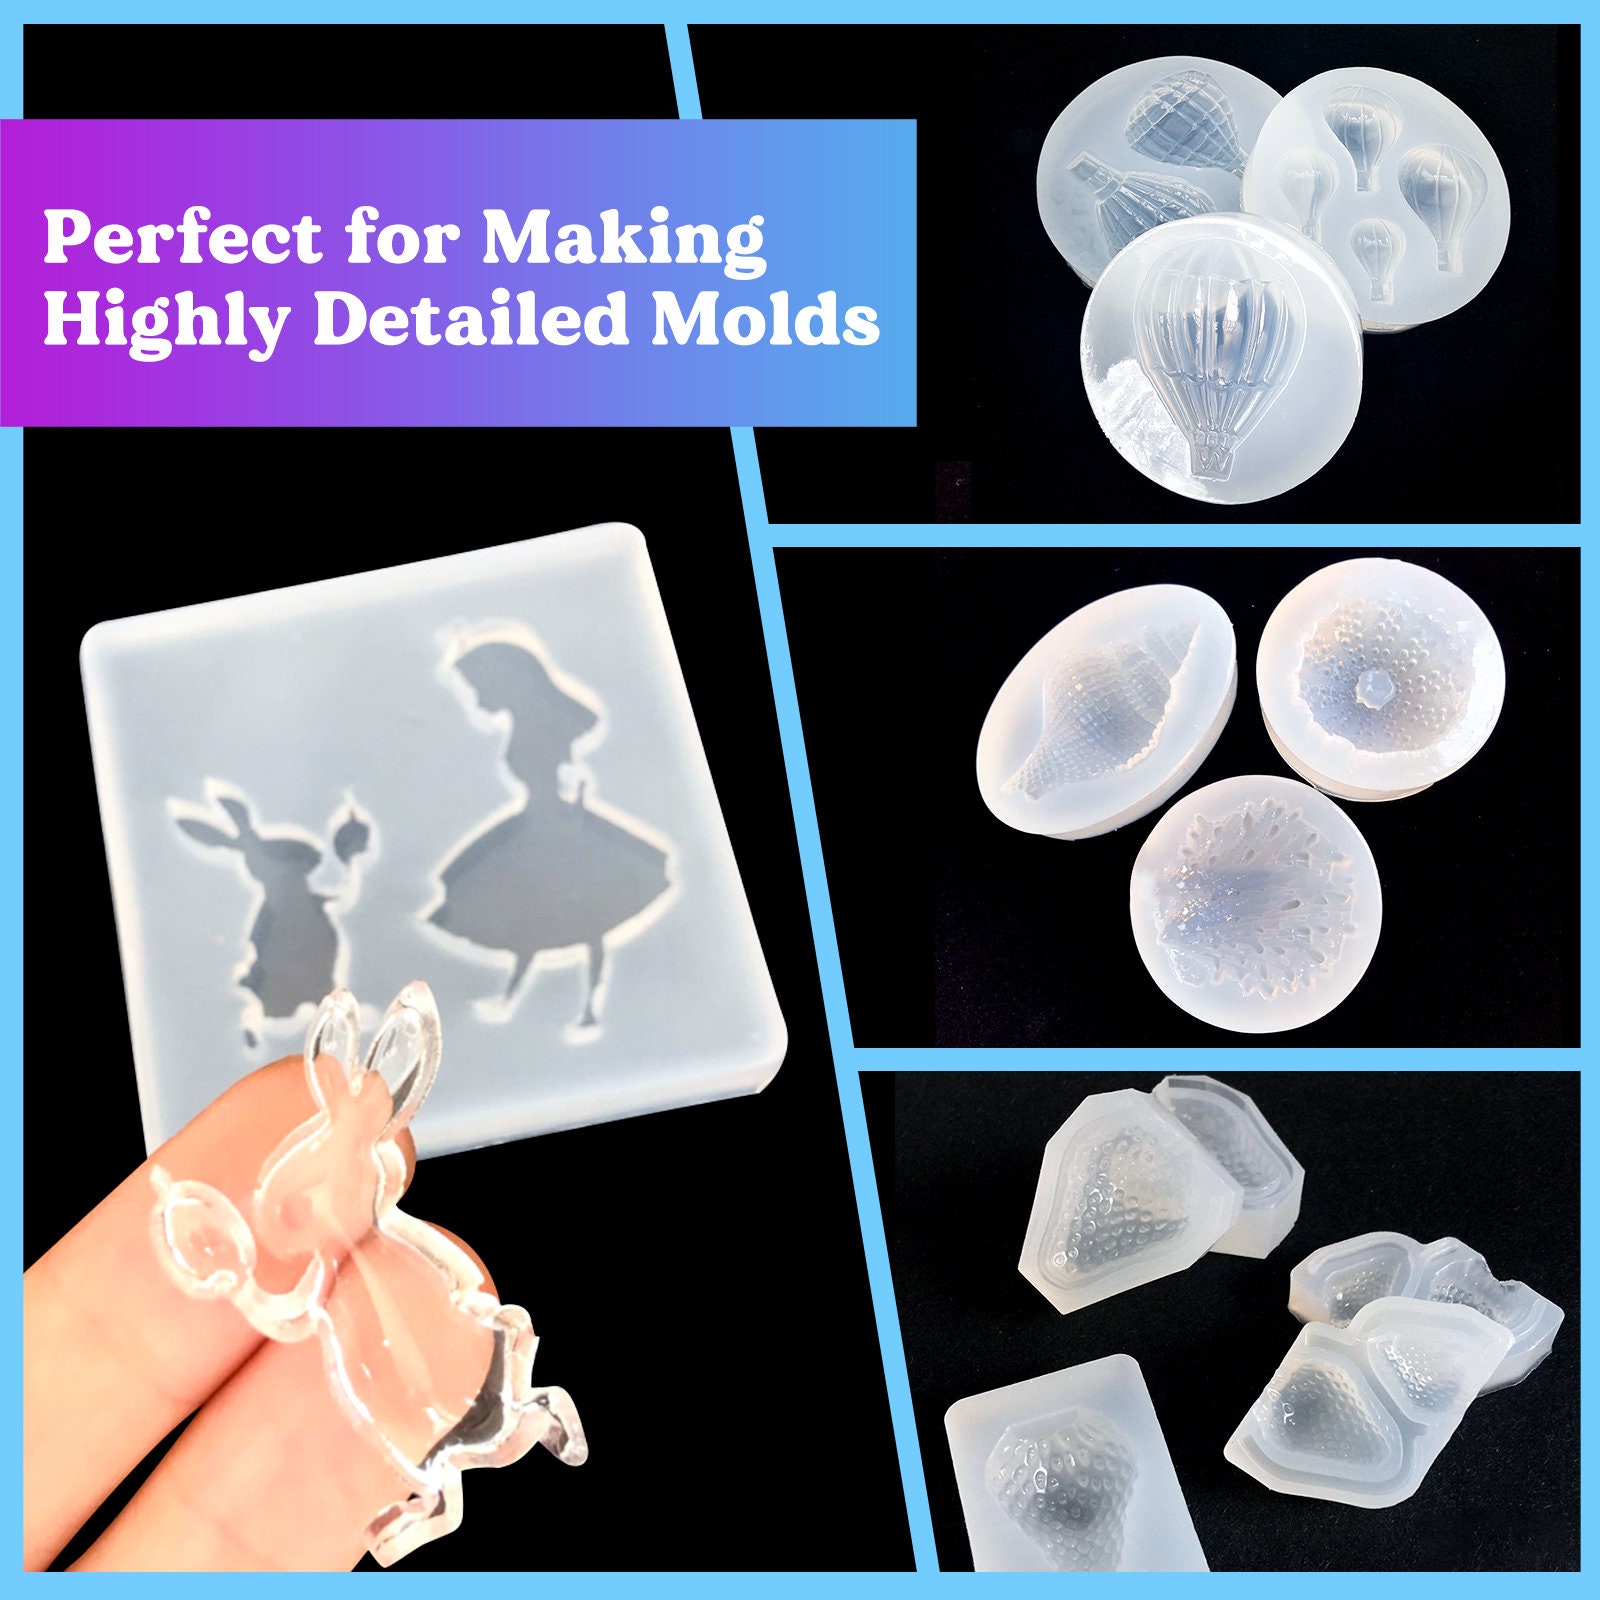 LET'S RESIN Silicone Mold Making Kit Translucent Silicone Rubber